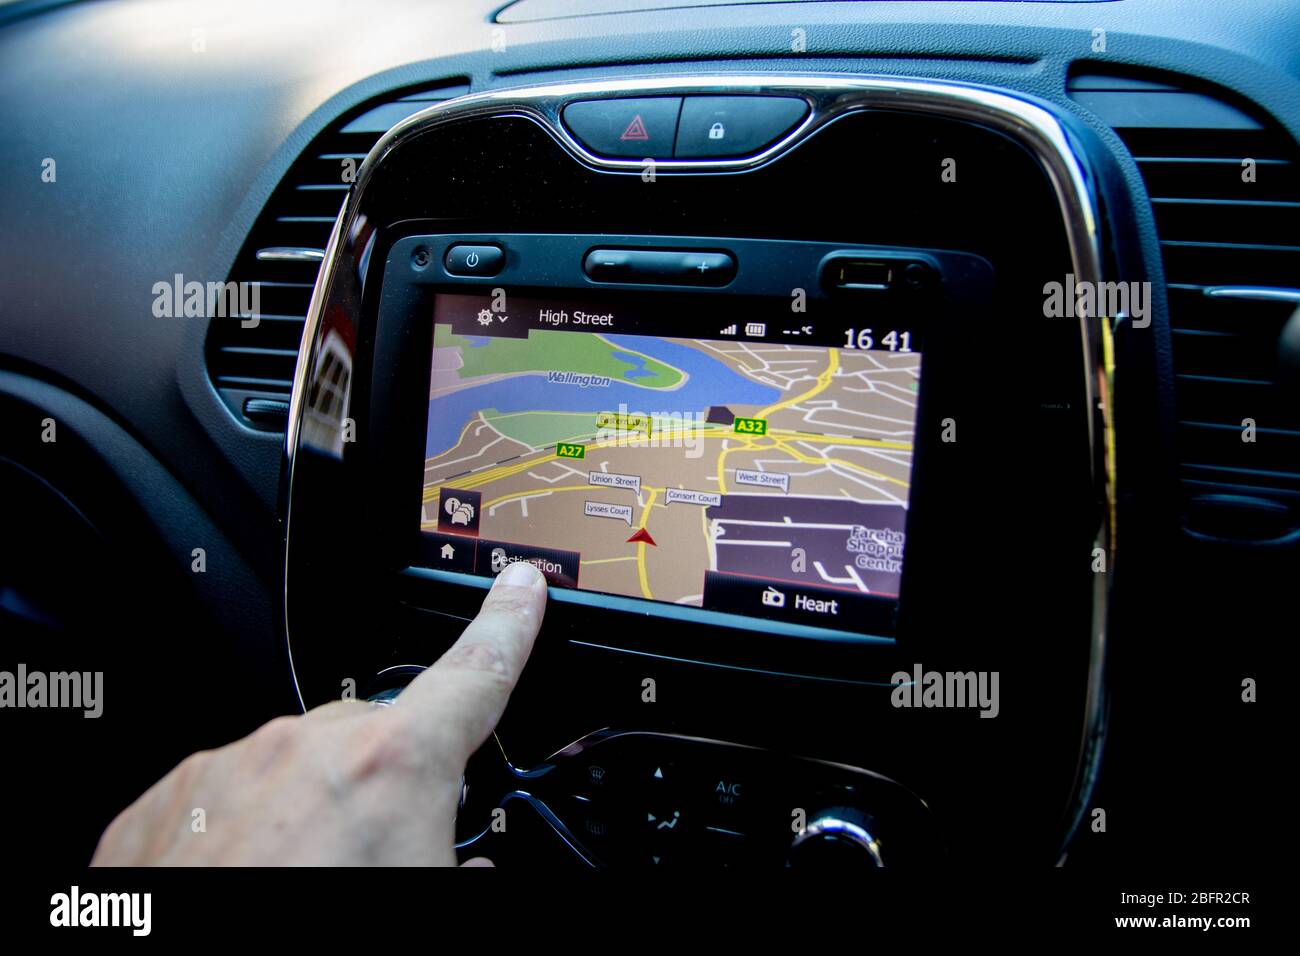 A close up of a finger operating a sat nav or satellite navigation unit inside a car Stock Photo